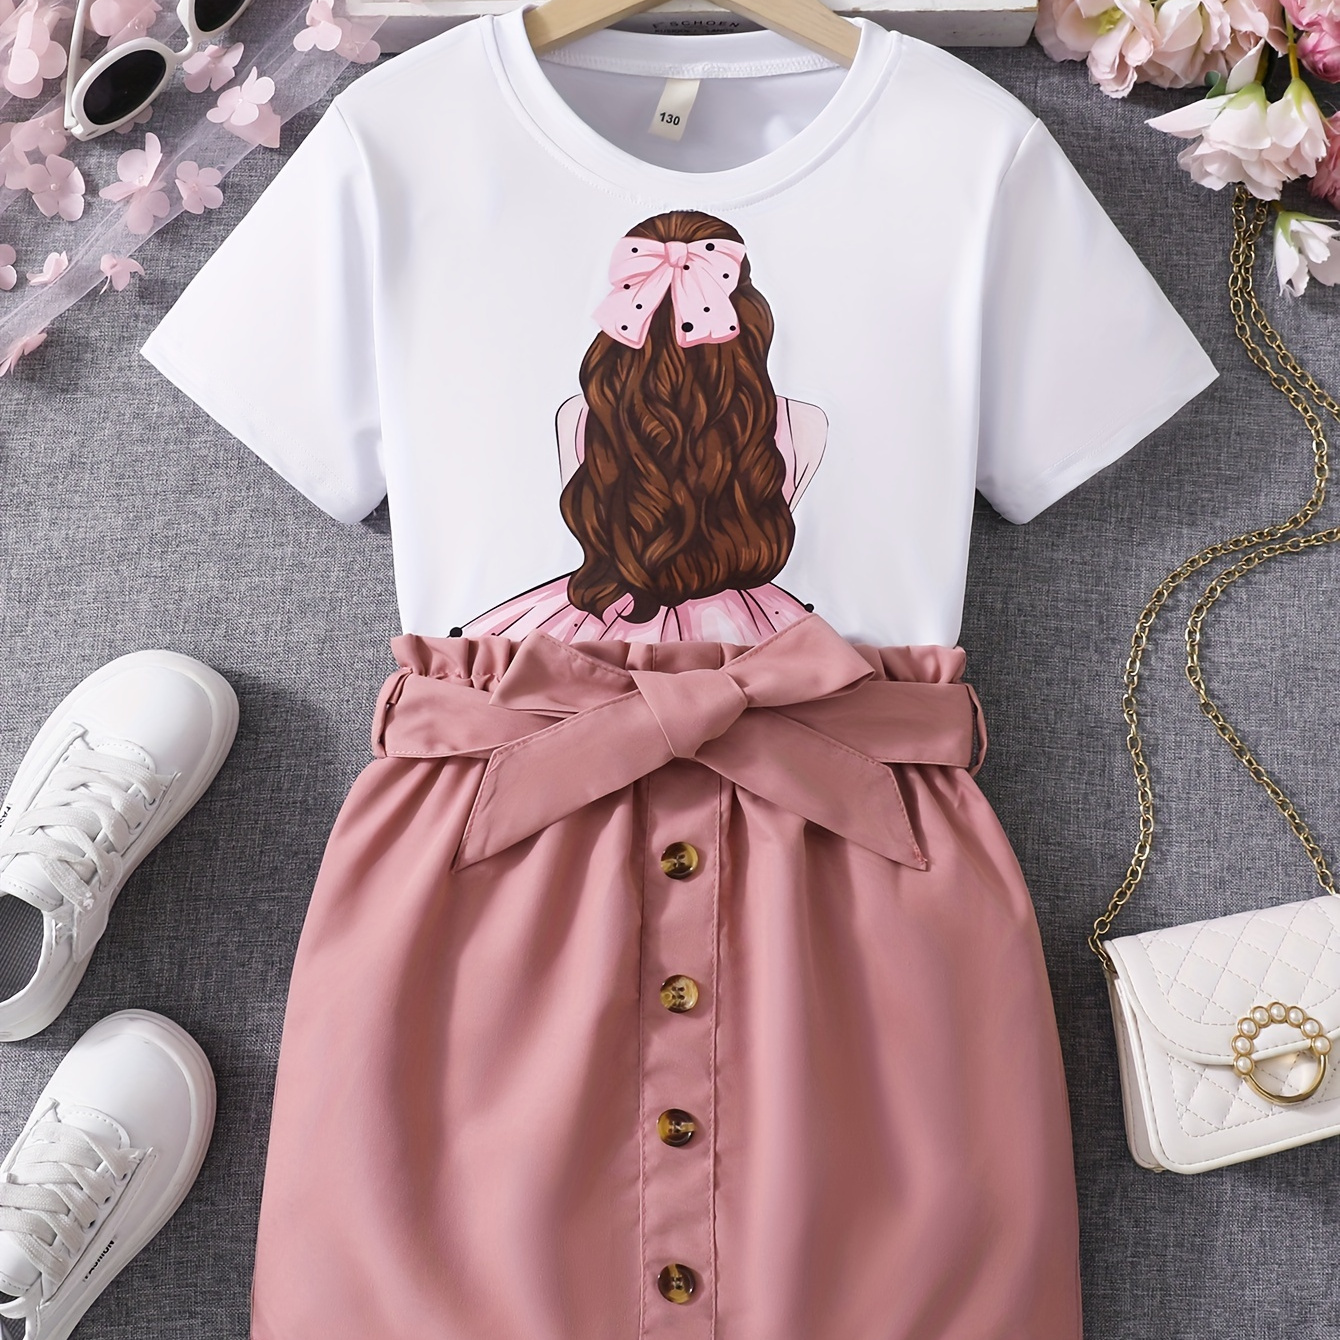 

Girls Outfit, Classy Portrait Print Short Sleeve Top + Buttons Straight Skirt Set, Casual 2pcs Summer Clothes